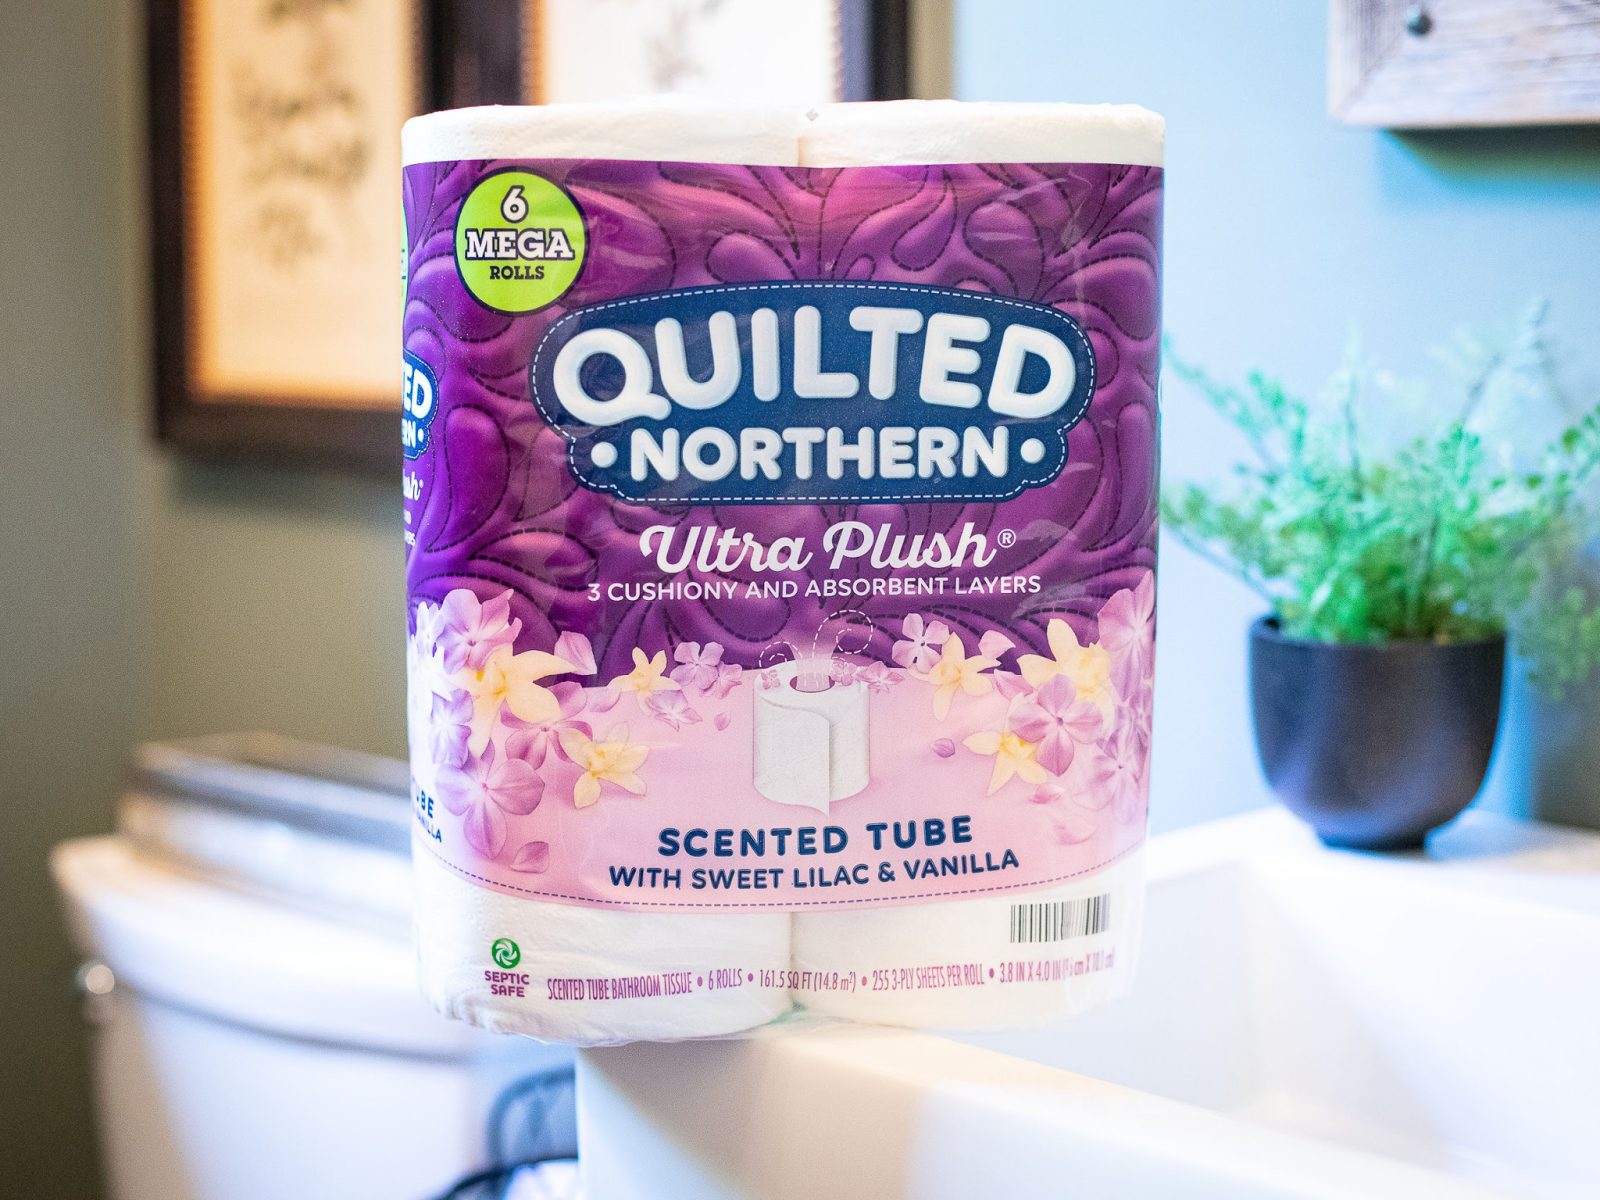 Quilted Northern Bathroom Tissue As Low As $5.99 At Publix on I Heart Publix 2